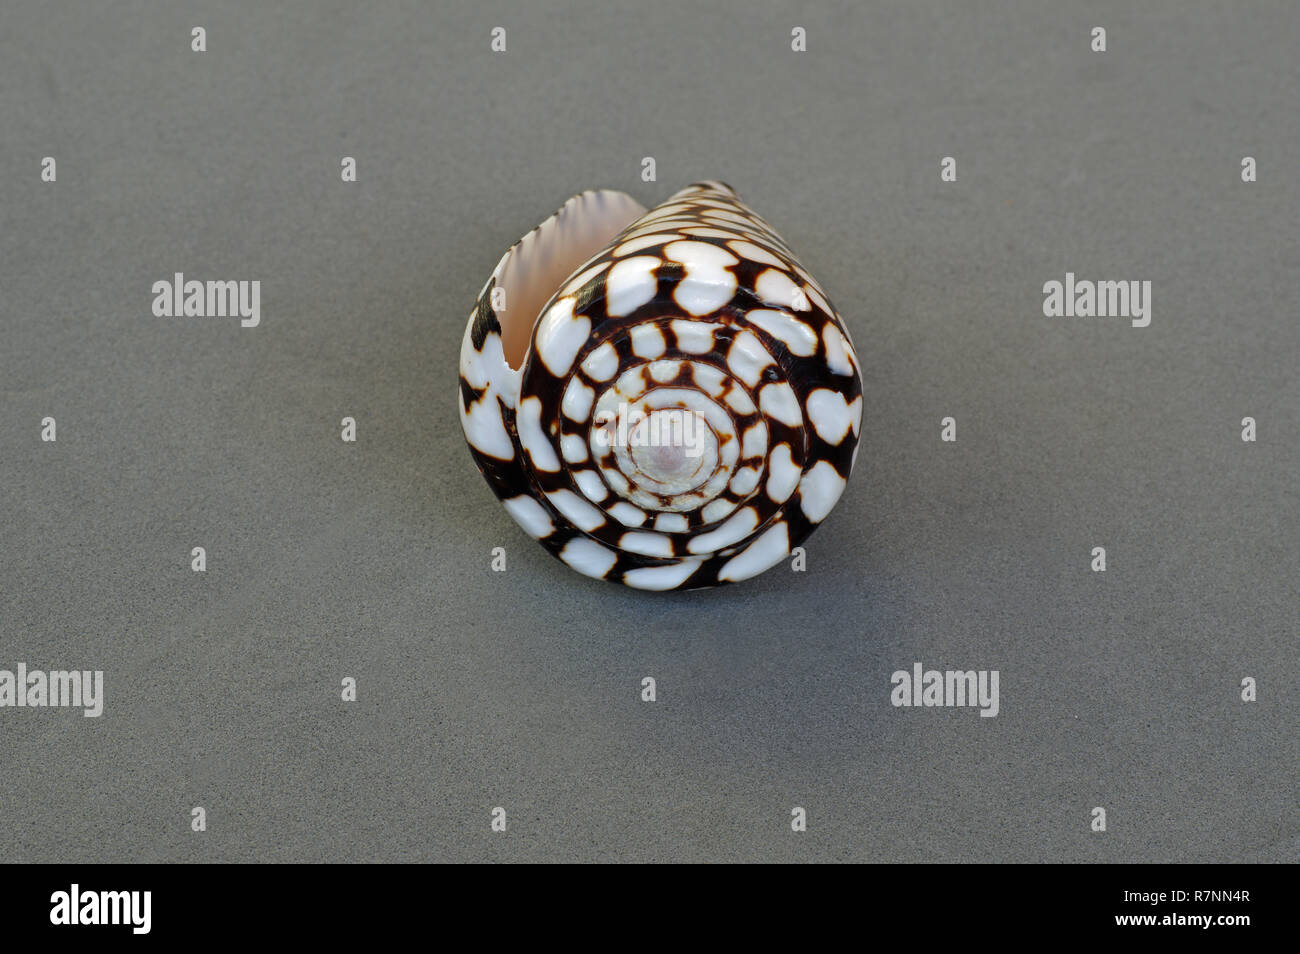 the shell of the Sea snail Conus marmoreus, the Marbled Cone snail, order Conidae Stock Photo